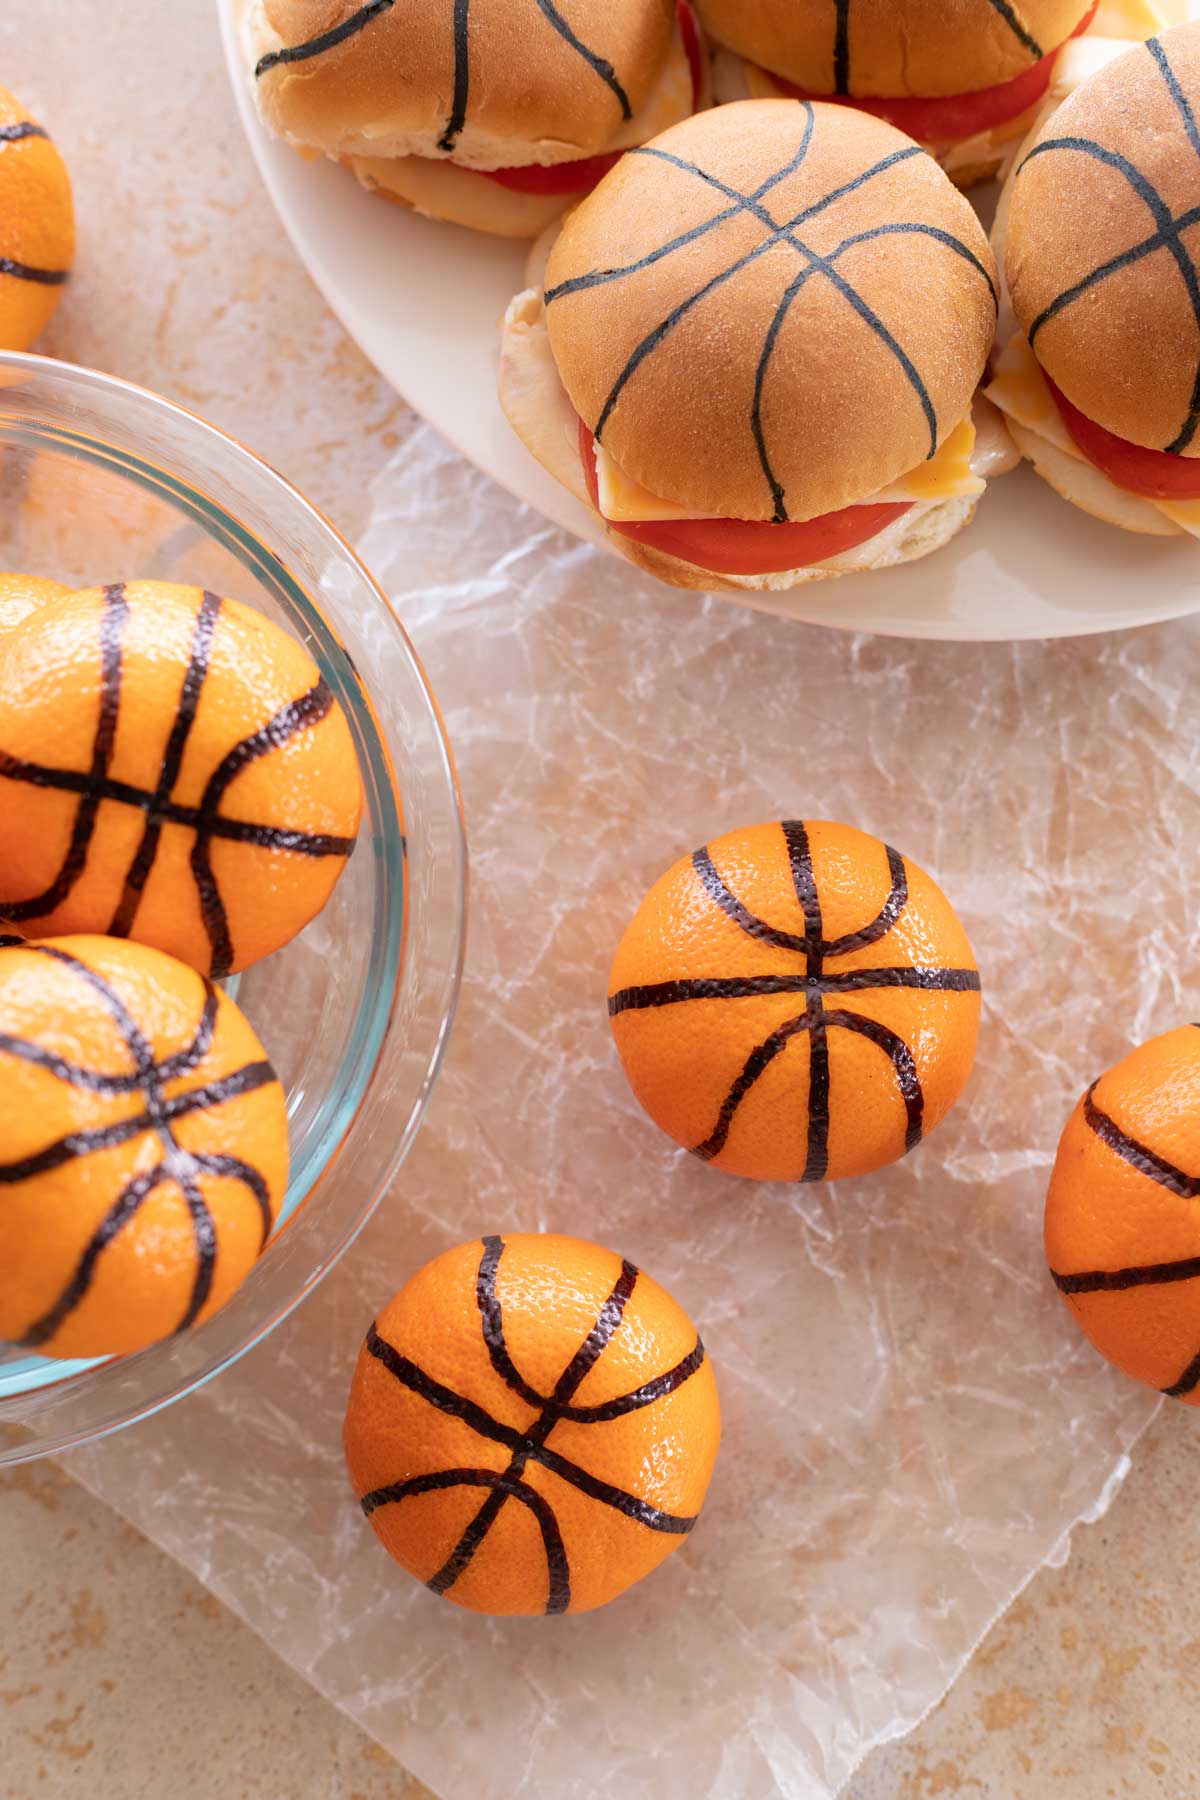 Overhead of several clementine basketballs with a platter of decorated sliders in background.